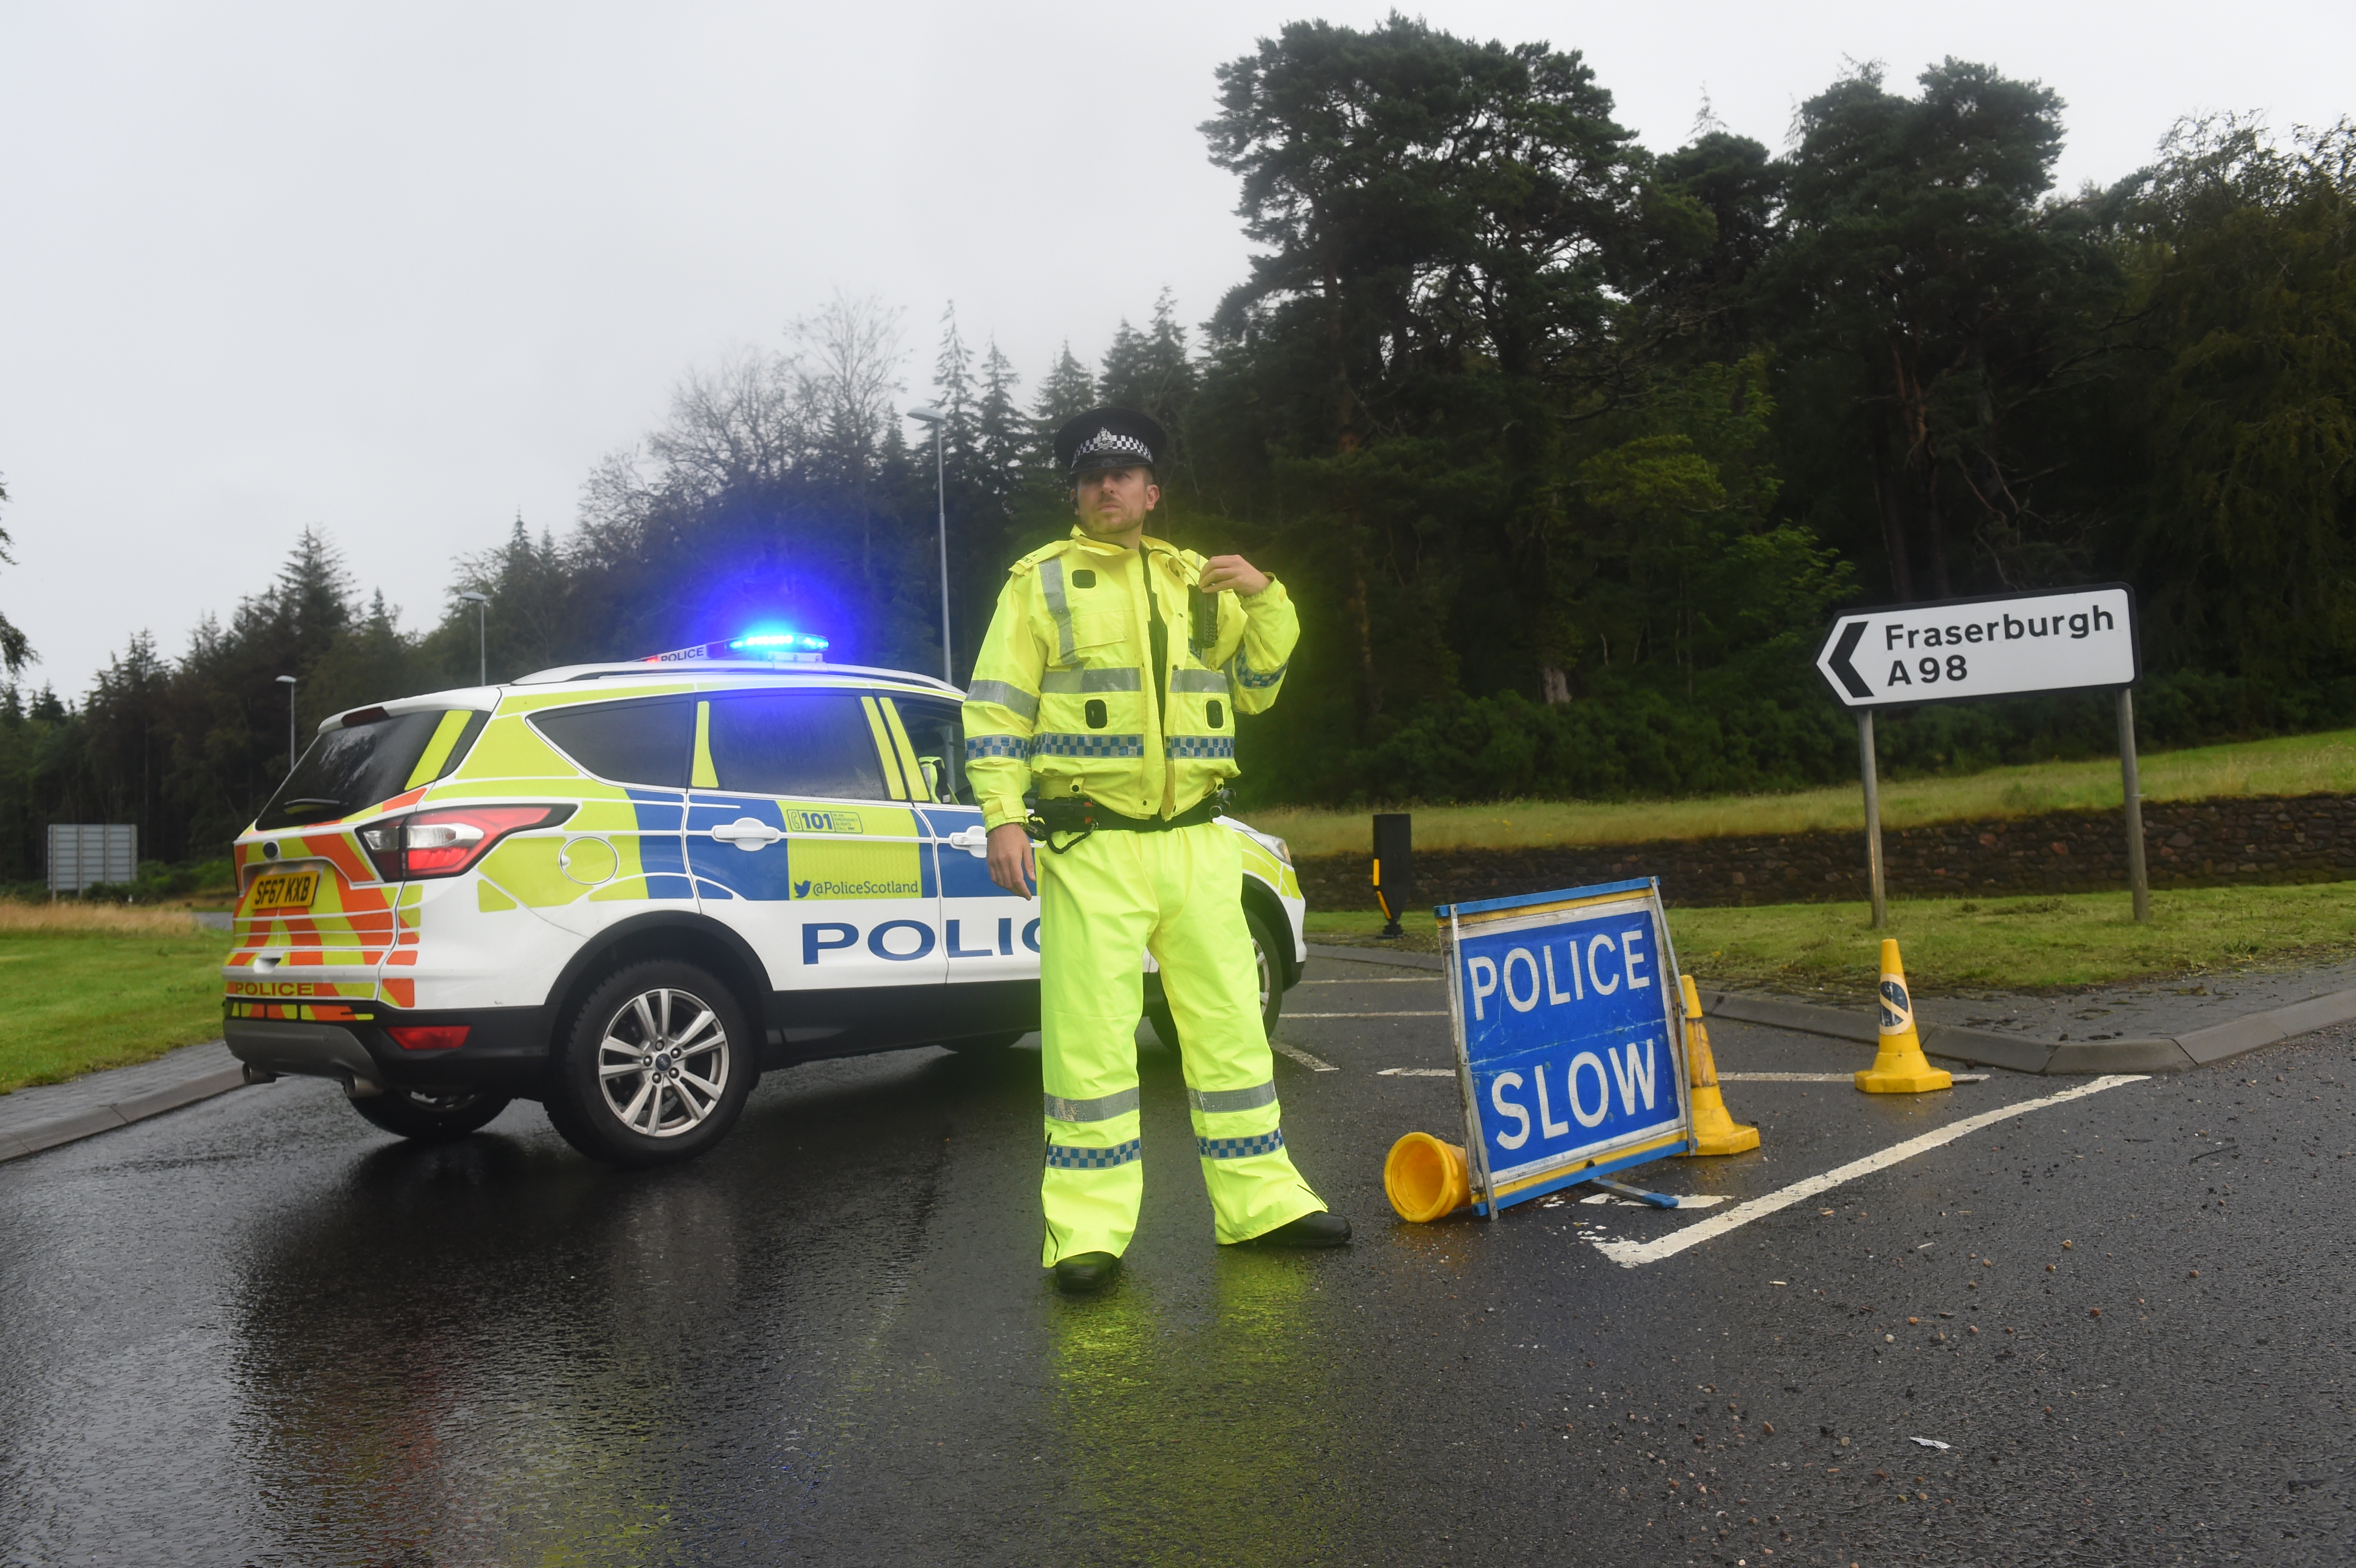 Police closed the road at Fochabers